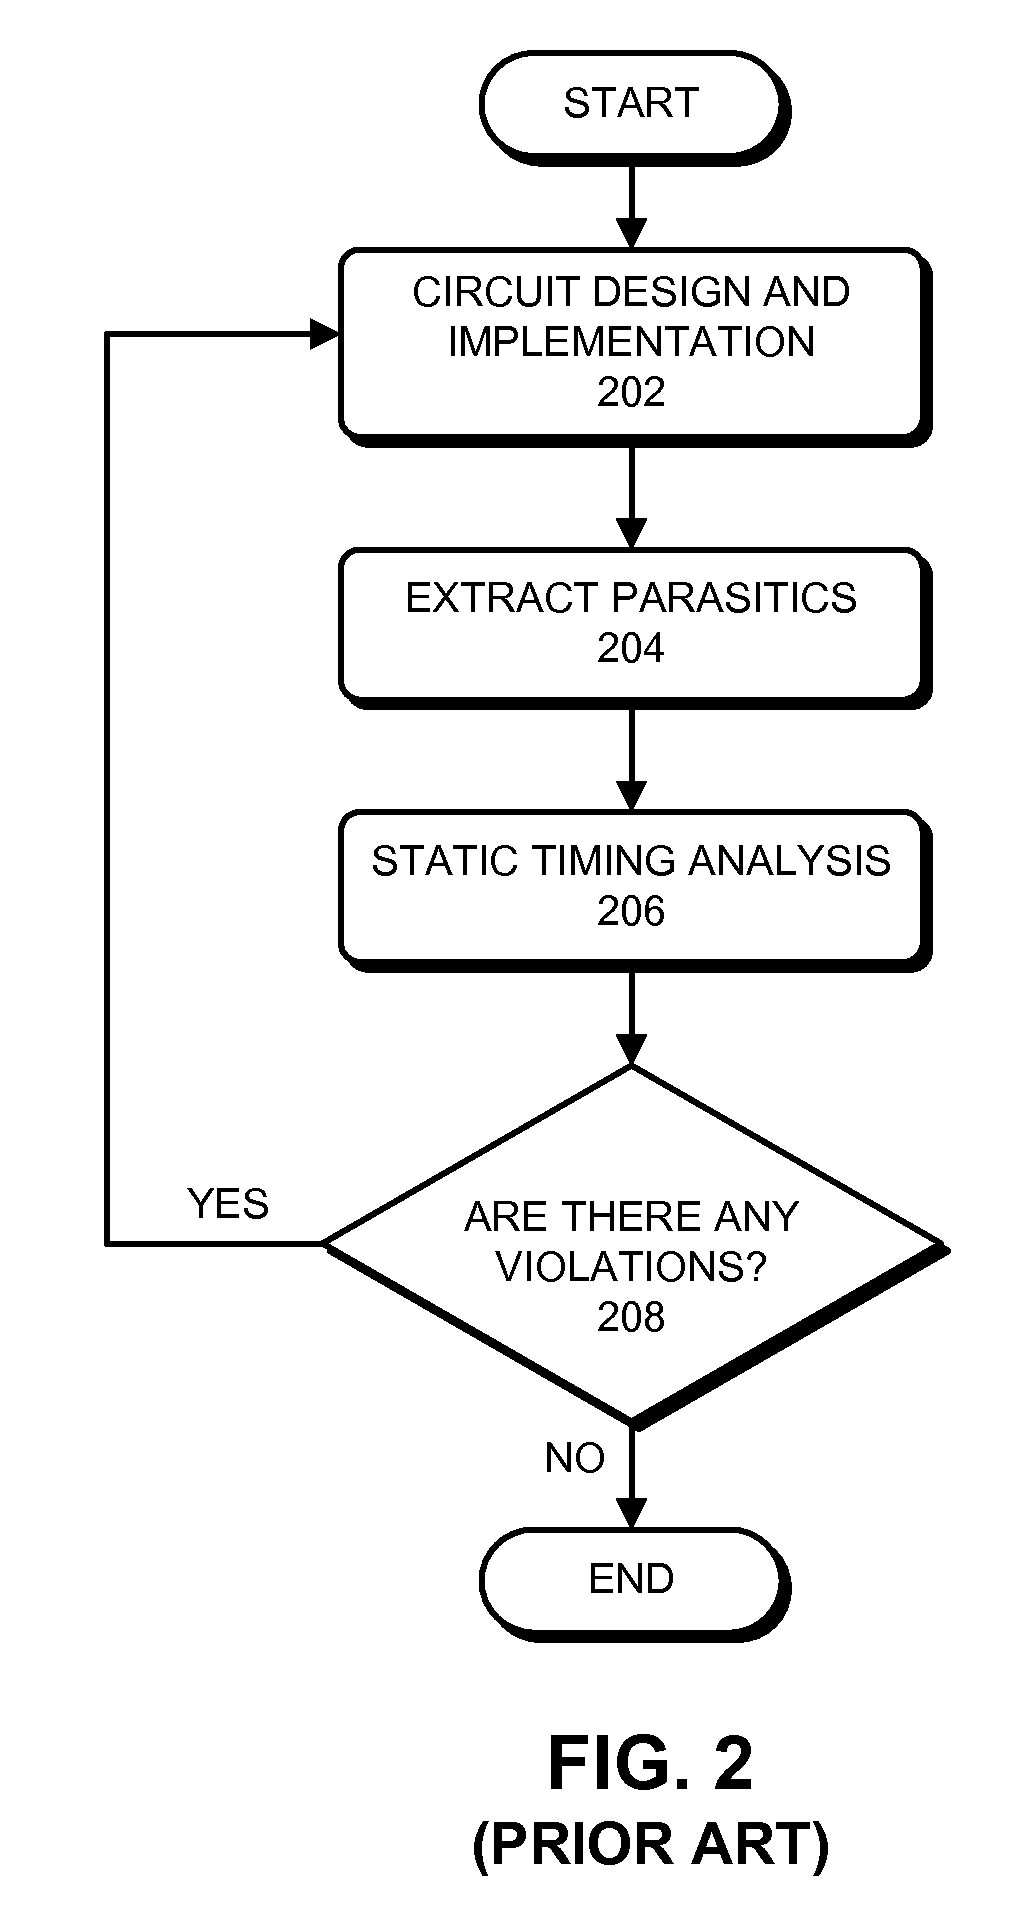 Efficient exhaustive path-based static timing analysis using a fast estimation technique